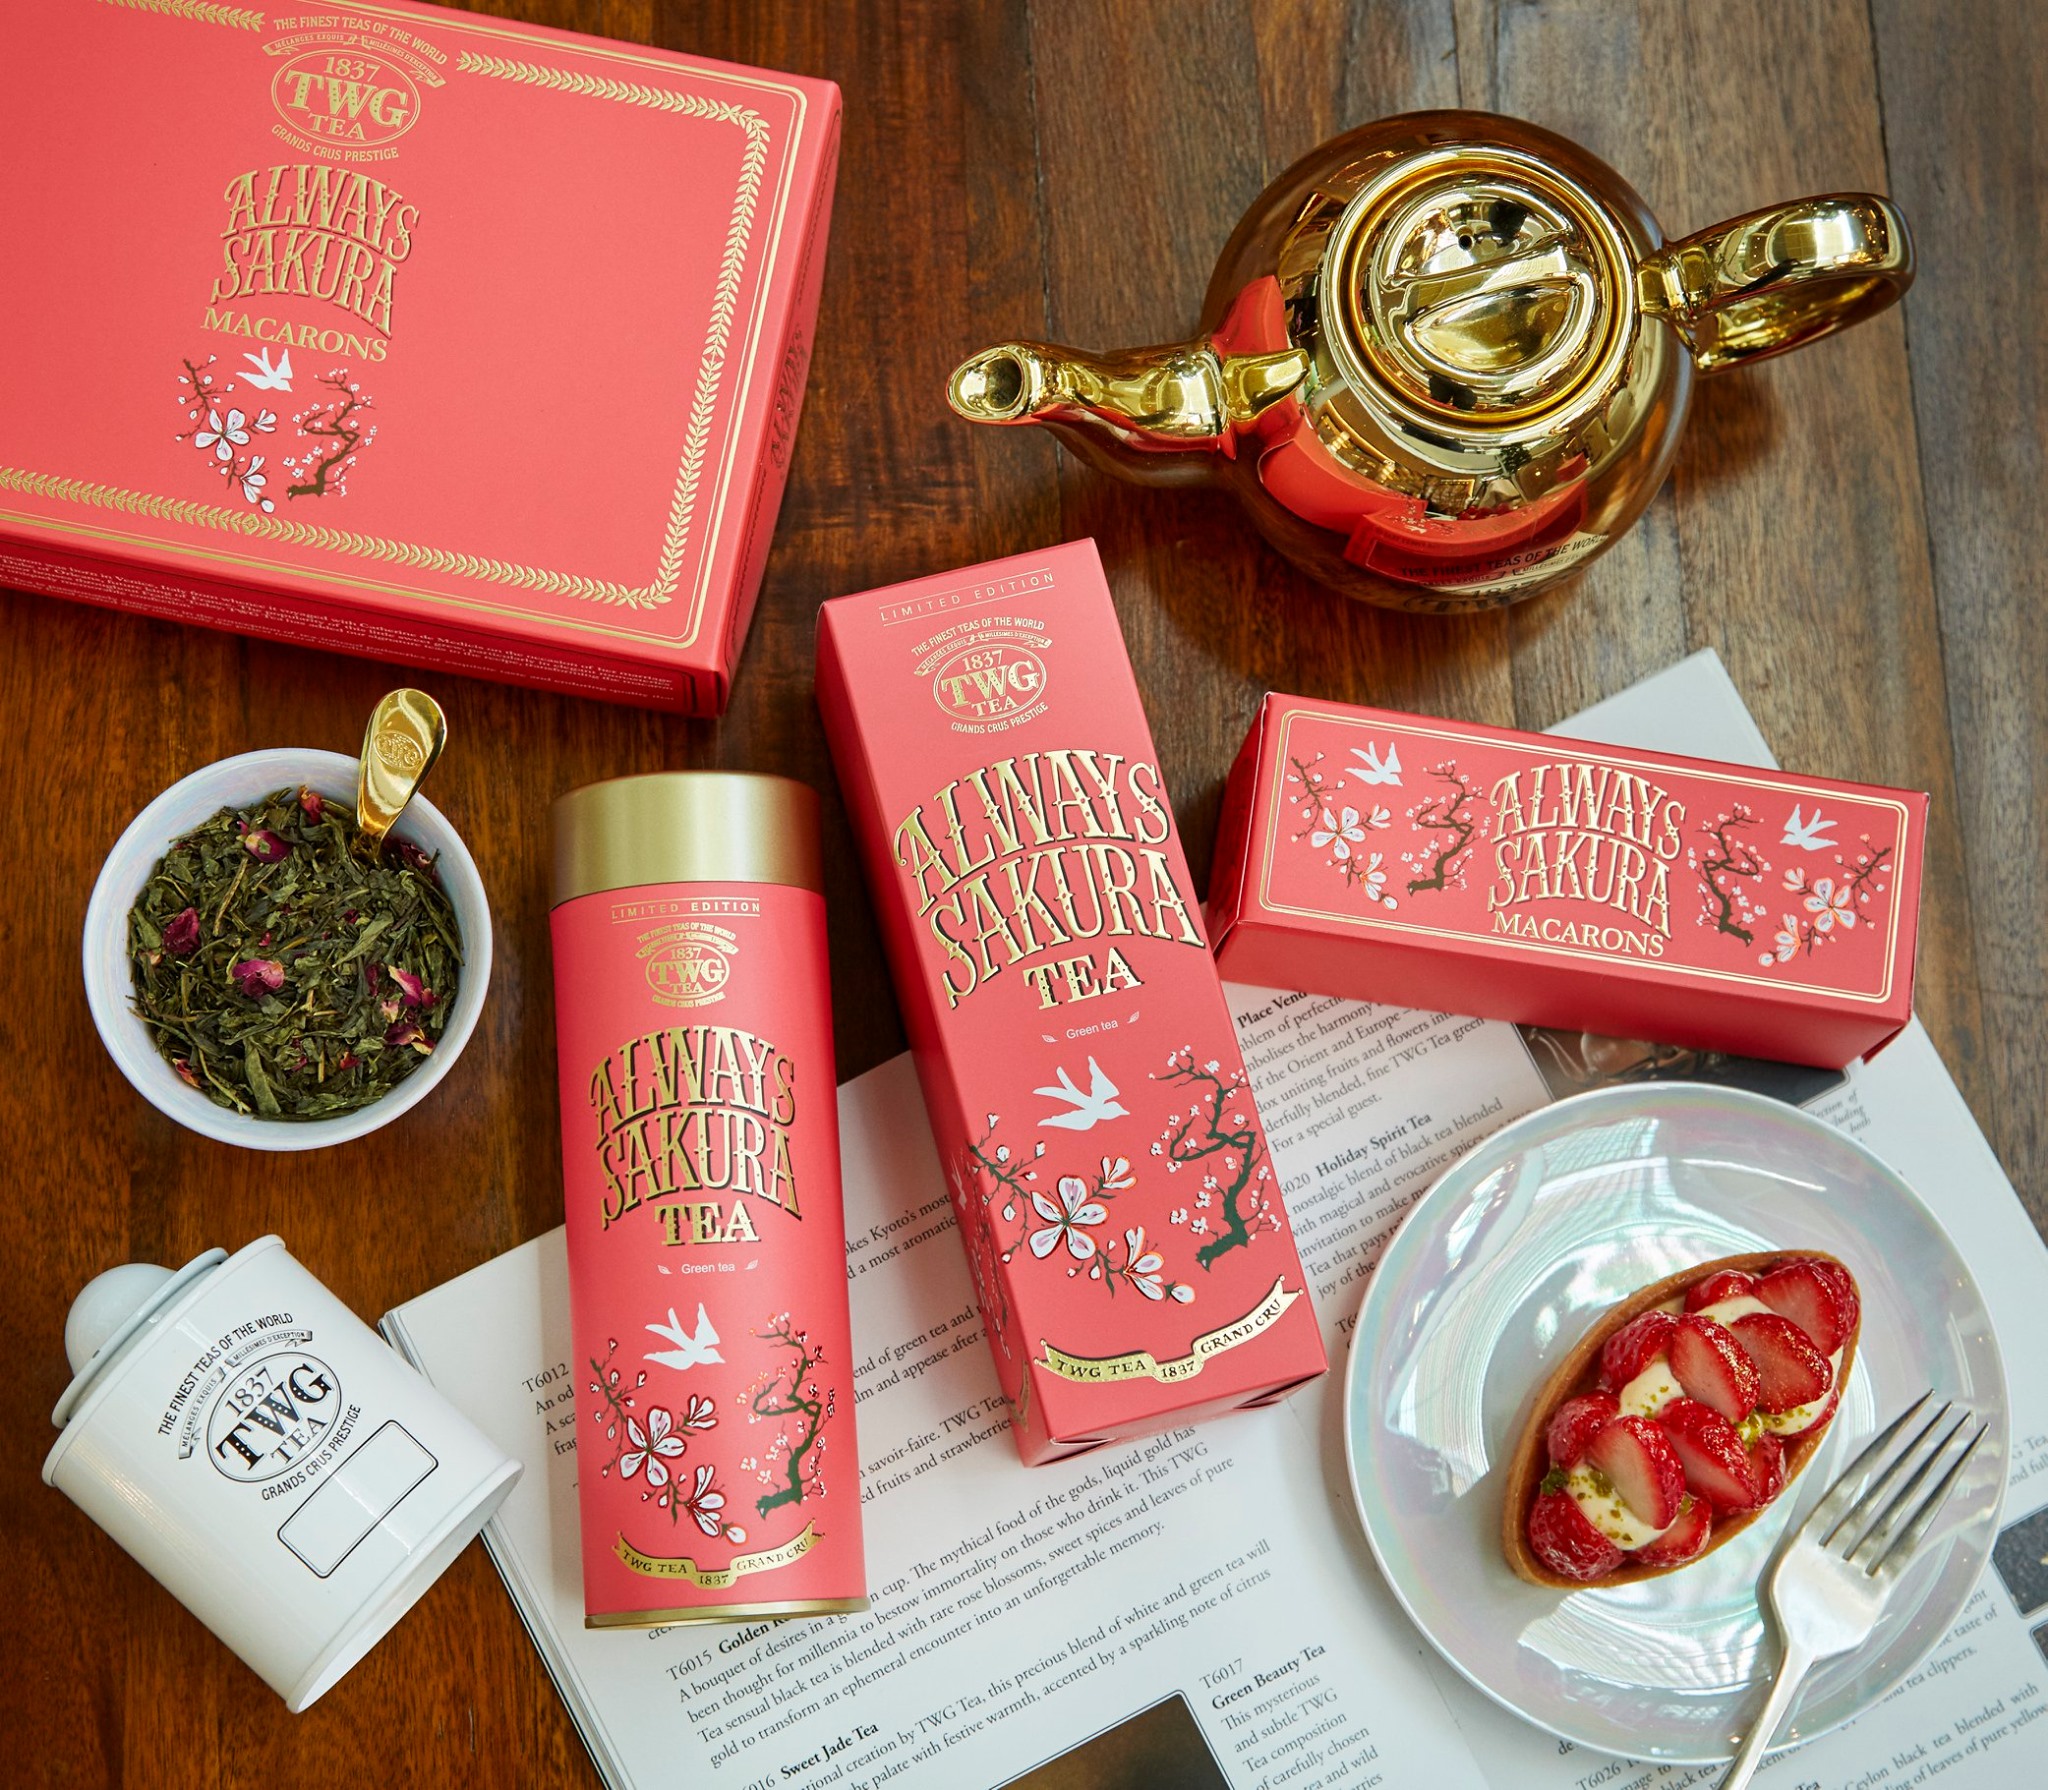 This Spring, breathe the fresh, sweet perfume of the season and tantalise your palate with our collection of floral blends and Always Sakura Tea. Beautifully blended with green tea and notes of wild Rainier cherry and rose blossoms, the Always Sakura Tea from the Haute Couture Tea Collection® yields an exceptionally fresh and elegant infusion with a subtle floral aftertaste. Available for a limited time only at TWG Tea Salons & Boutiques in Singapore from 12 March 2019 and retails at S$42.